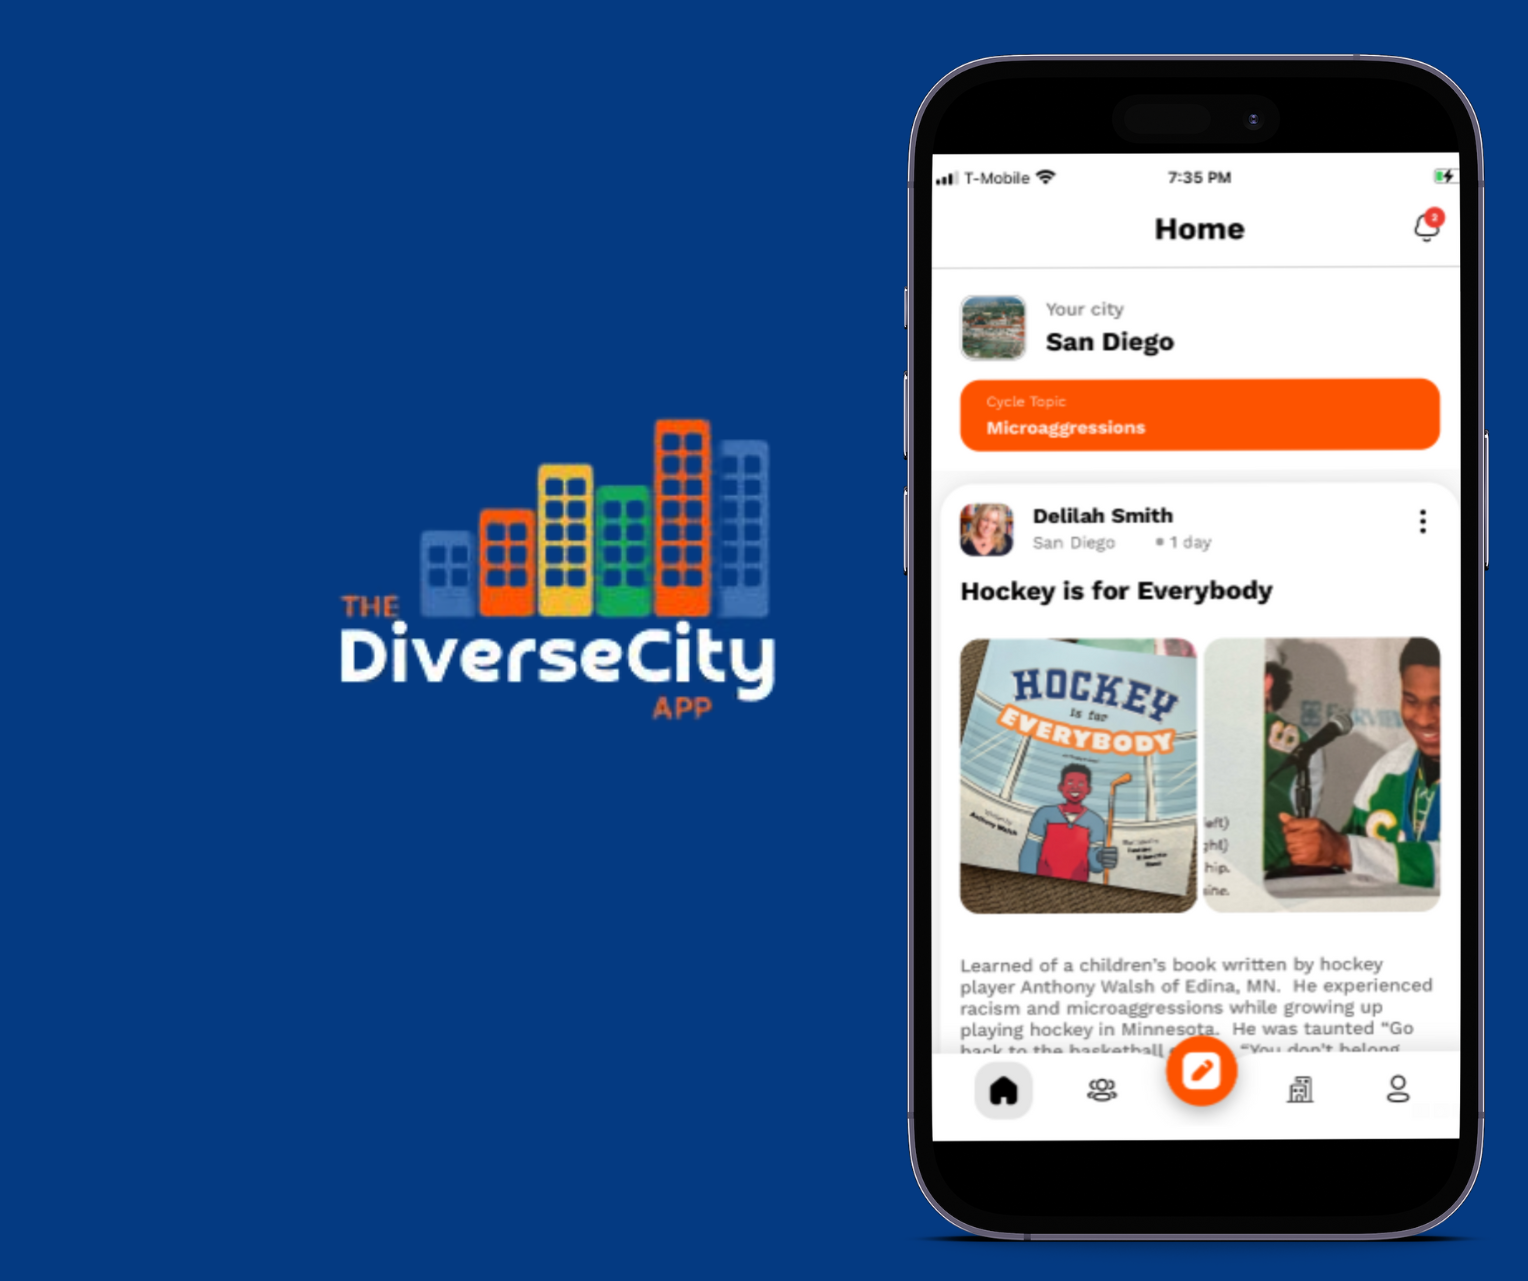 DiverseCity AppⓇ receives national certification as Minority Business Enterprise from NMSDC